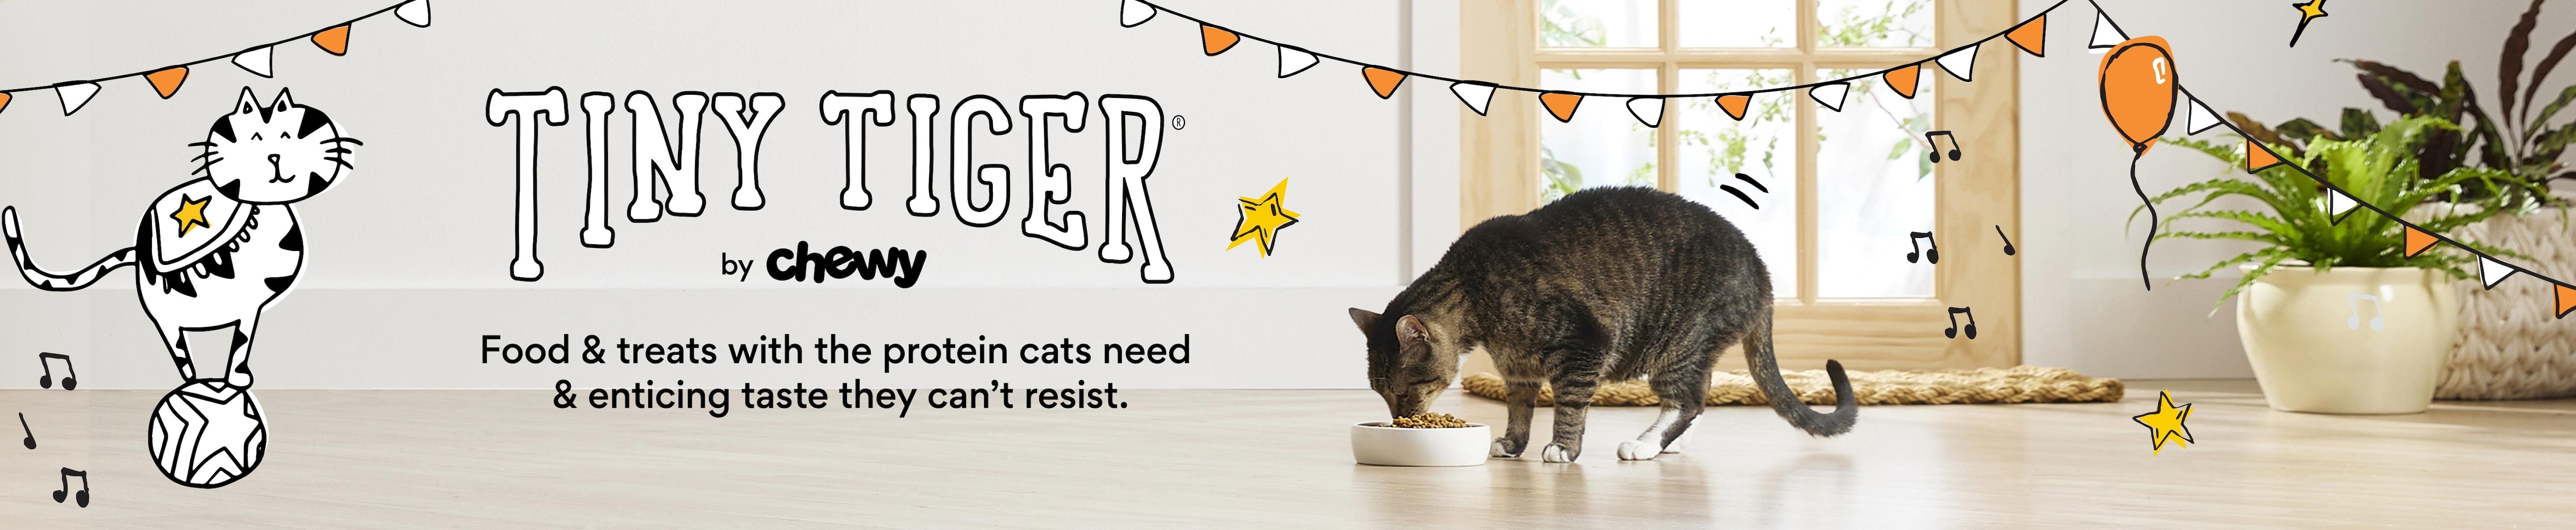 Tiny Tiger by Chewy. Food & treats with protein cats need & enticing taste they can't resist.